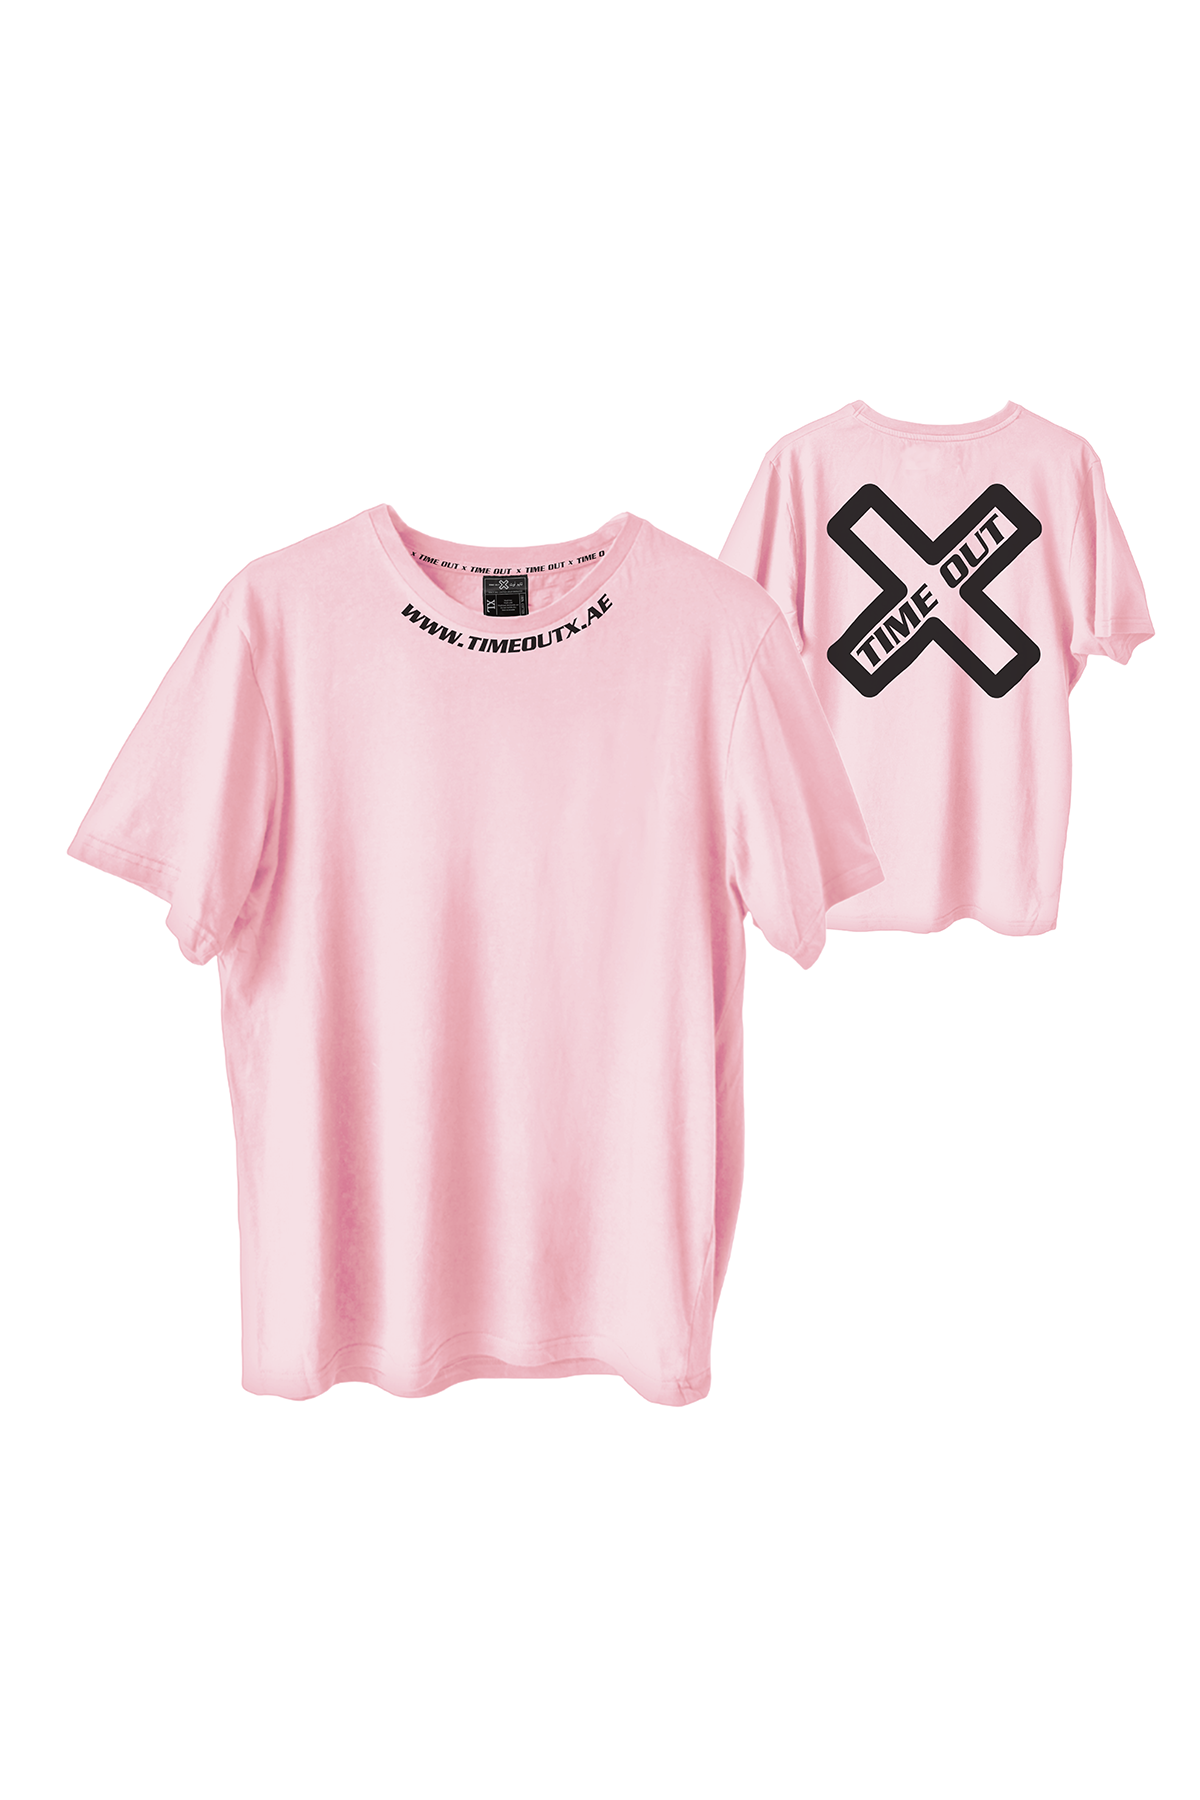 Time-Out-X-Signature-Basic-Cotton-Pastel-Pink-T-Shirt-with-Print—Front-and-Back